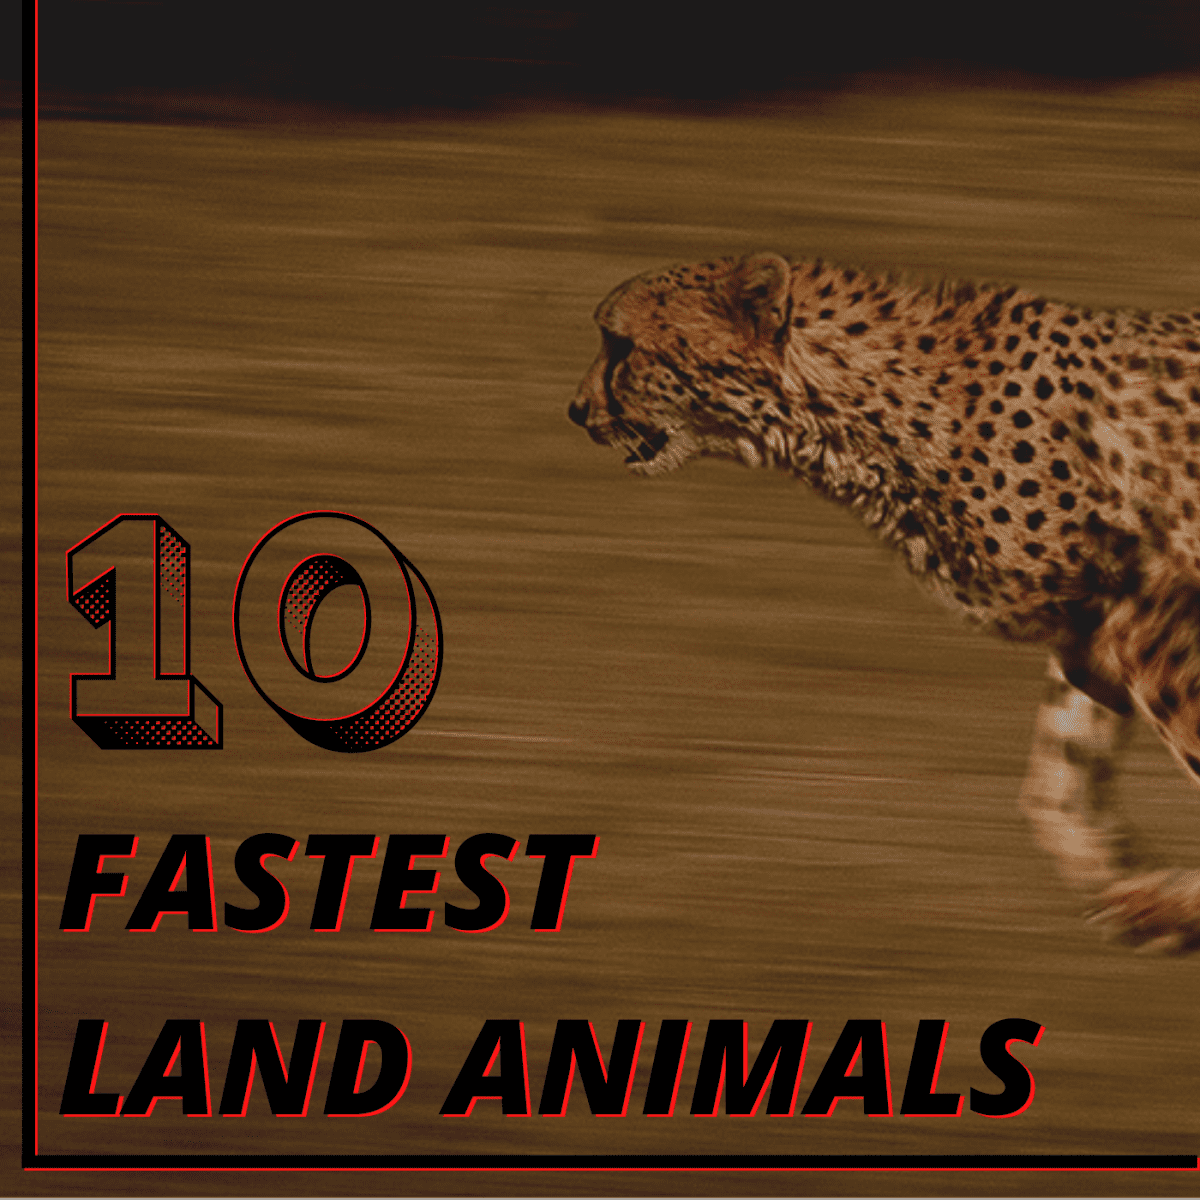 What is the top 10 fastest animal on land?